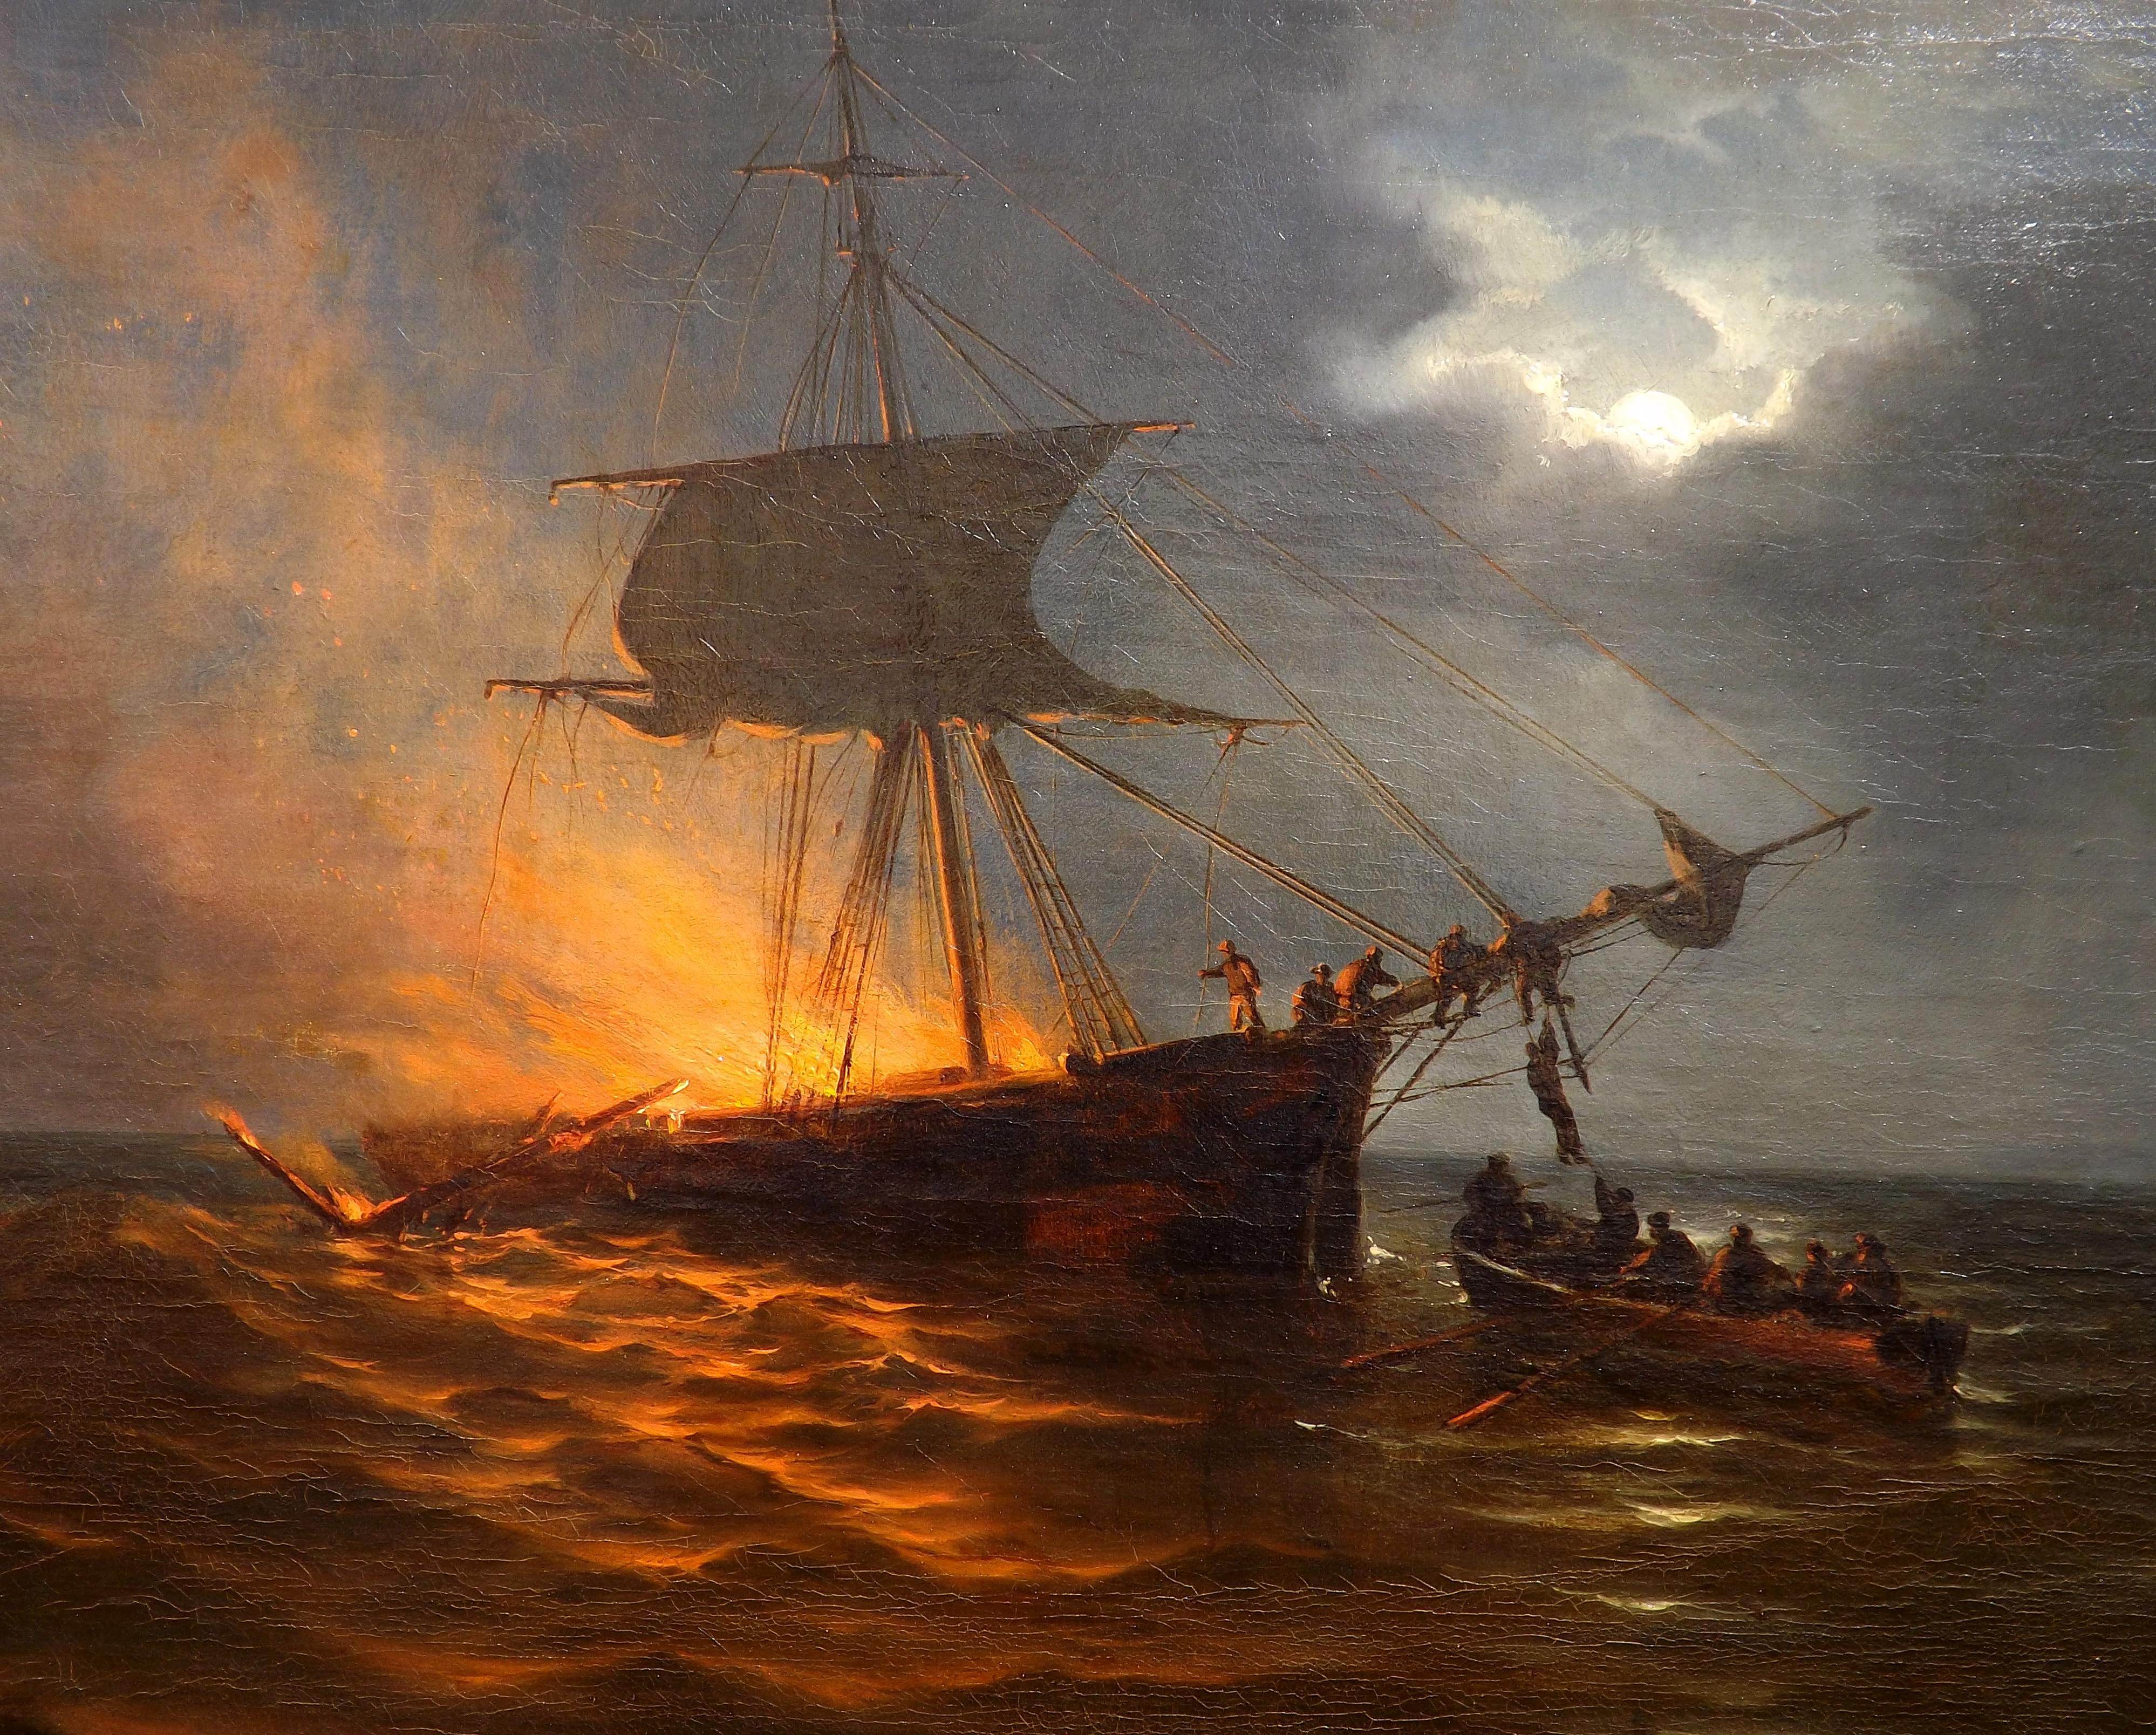 An epic painting of a ship burning while at sea during the night by Dutch maritime painter George Lourens Kiers. The flames rise high into the moonlit night as the crew quickly climbs down the rigging to an awaiting rowboat. A figure, presumably the